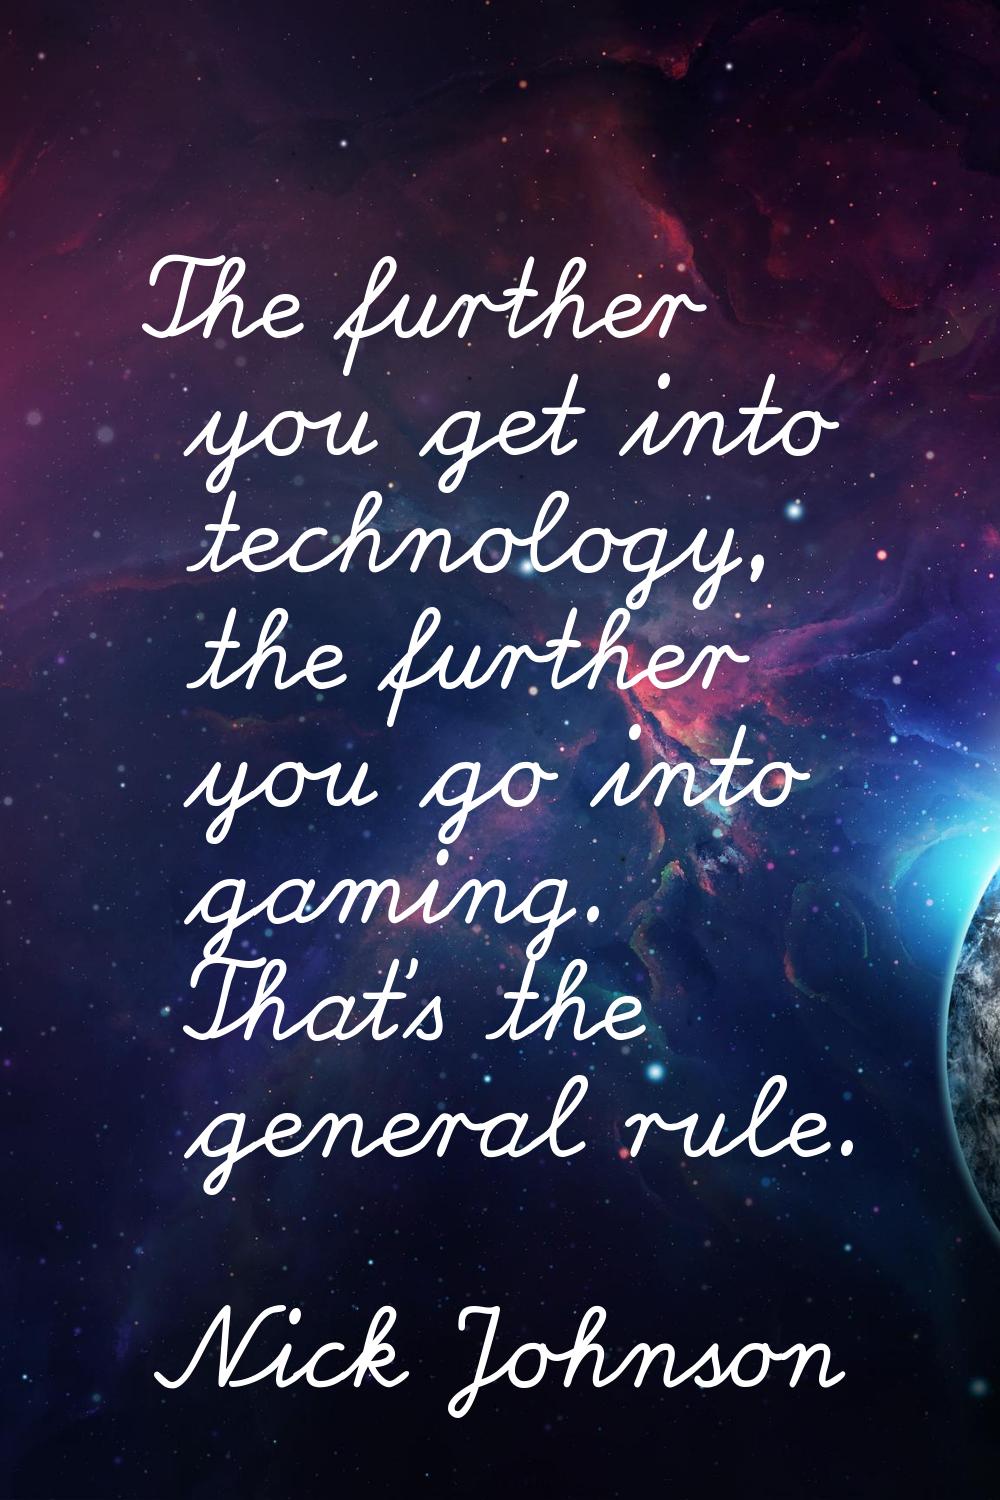 The further you get into technology, the further you go into gaming. That's the general rule.